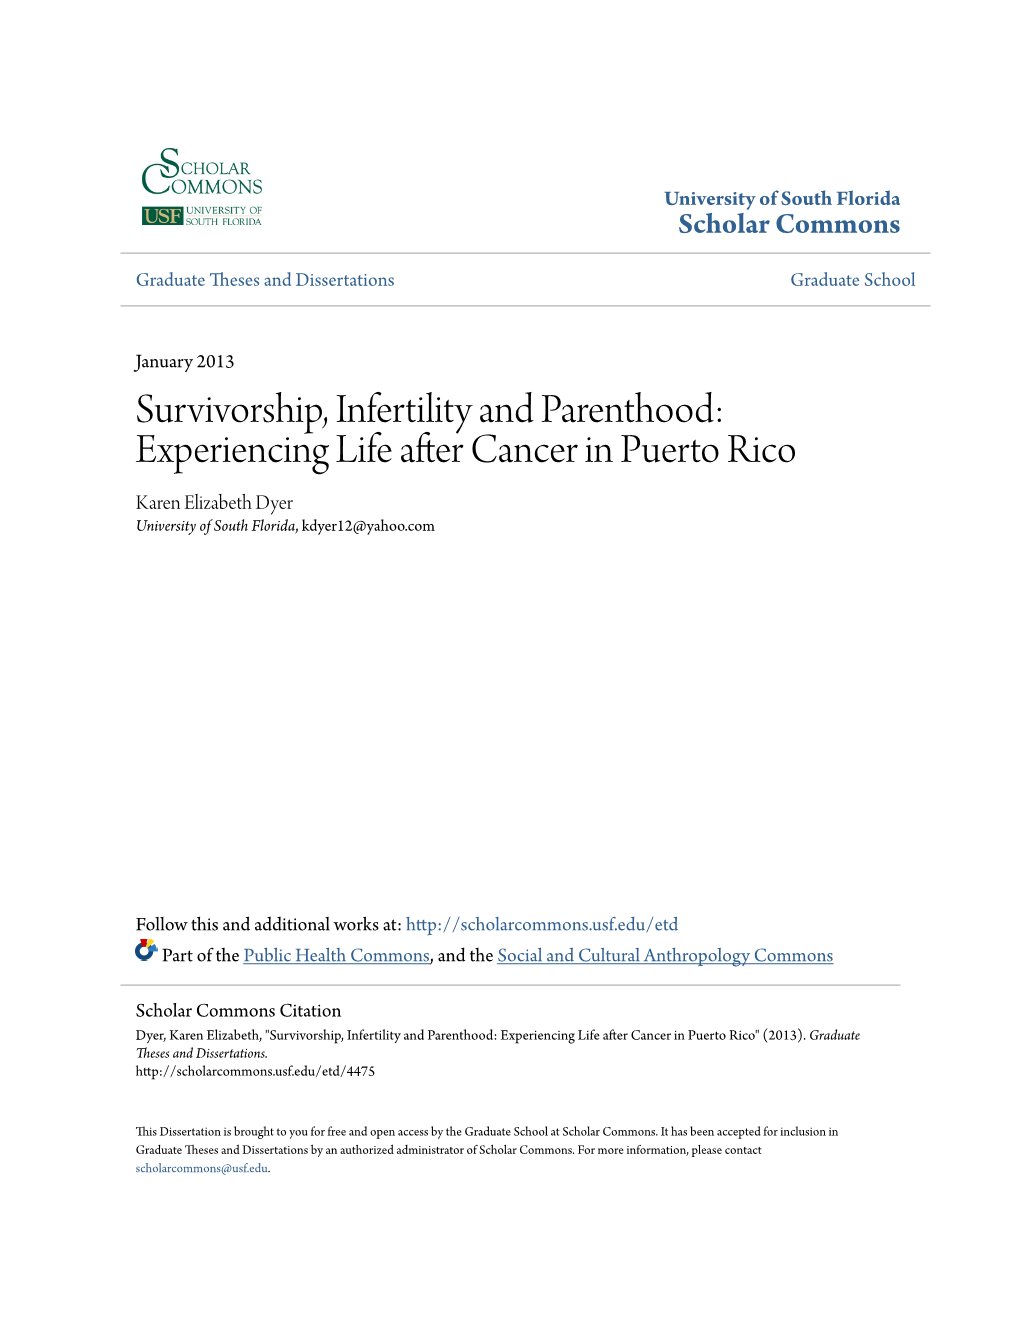 Survivorship, Infertility and Parenthood: Experiencing Life After Cancer in Puerto Rico Karen Elizabeth Dyer University of South Florida, Kdyer12@Yahoo.Com